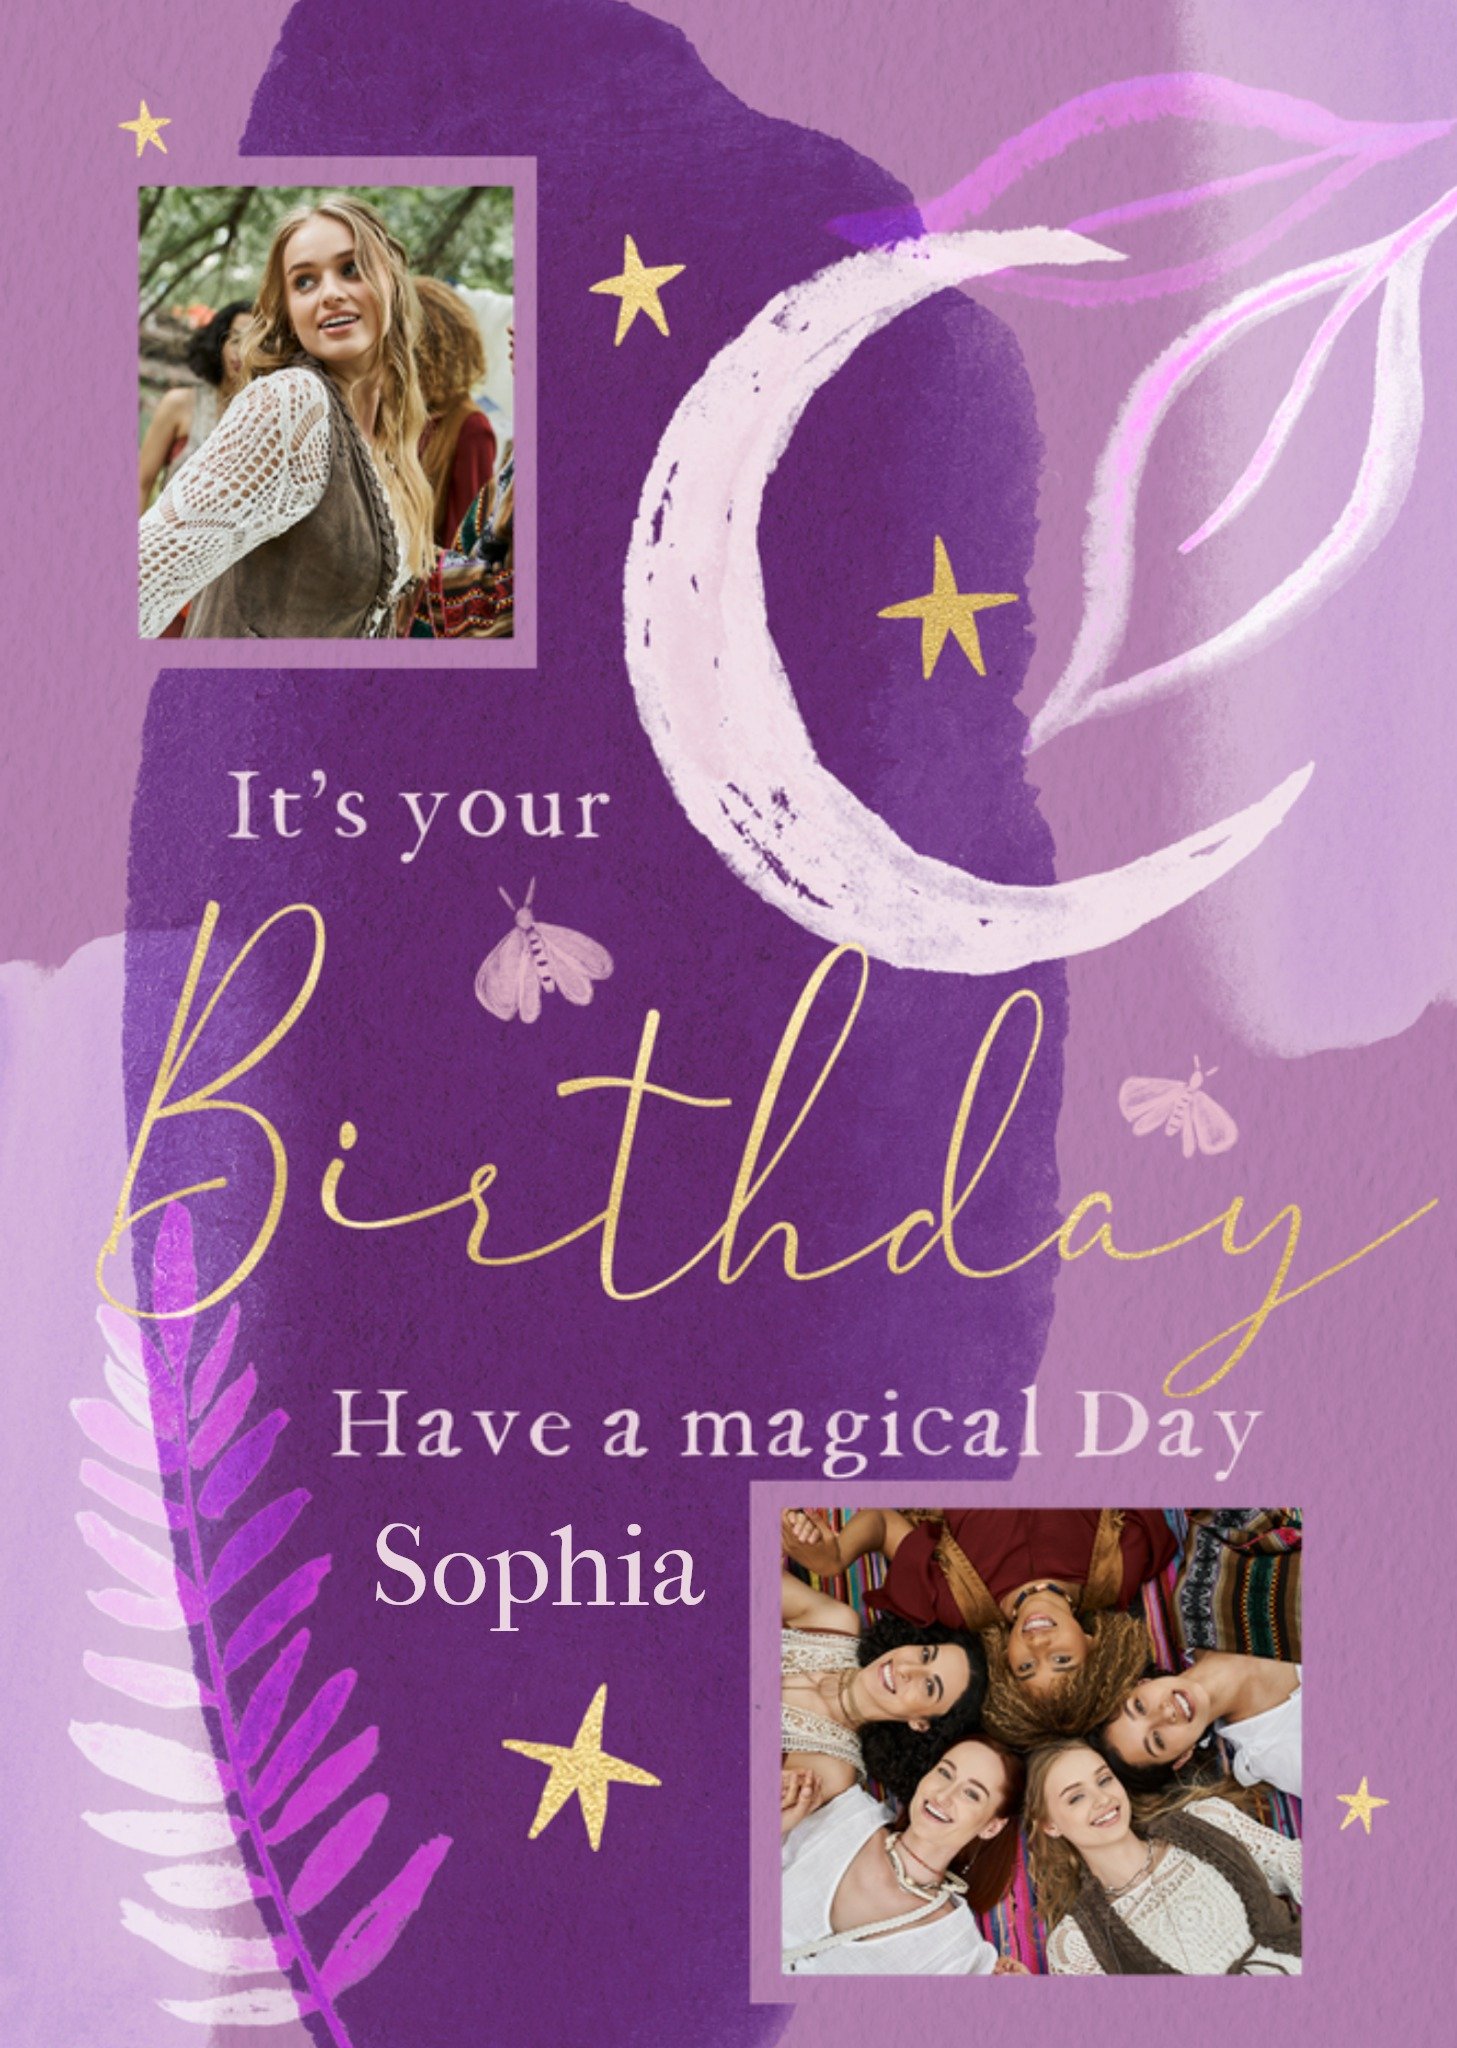 Friends Mystical Have A Magical Day Watercolour Crescent Moon Photo Upload Birthday Card, Large